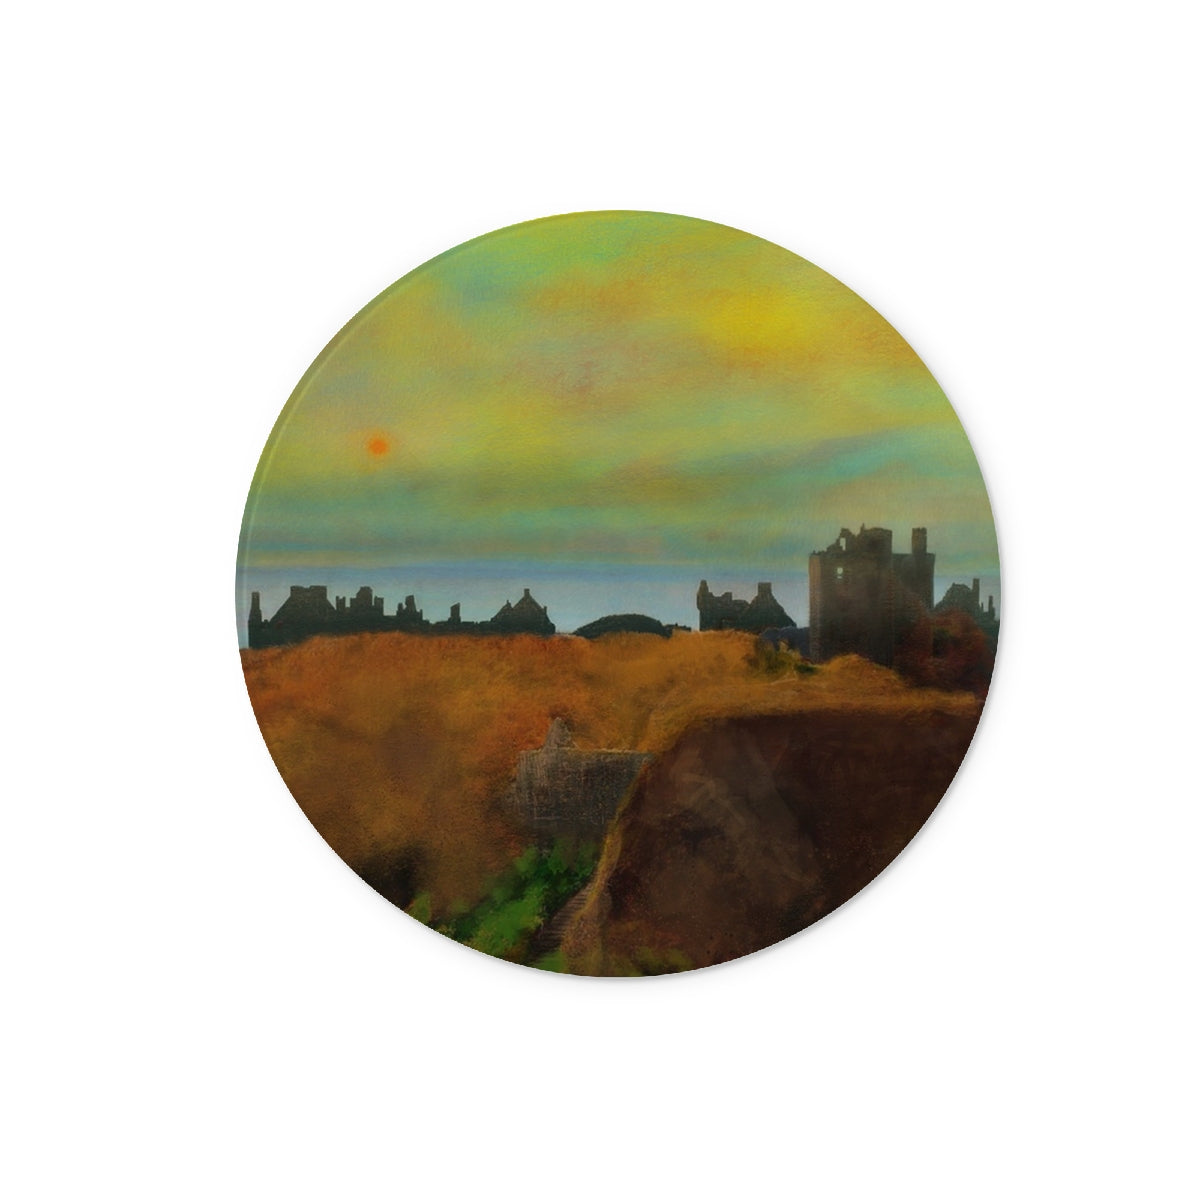 Dunnottar Castle Dusk Art Gifts Glass Chopping Board-Glass Chopping Boards-Historic & Iconic Scotland Art Gallery-12" Round-Paintings, Prints, Homeware, Art Gifts From Scotland By Scottish Artist Kevin Hunter